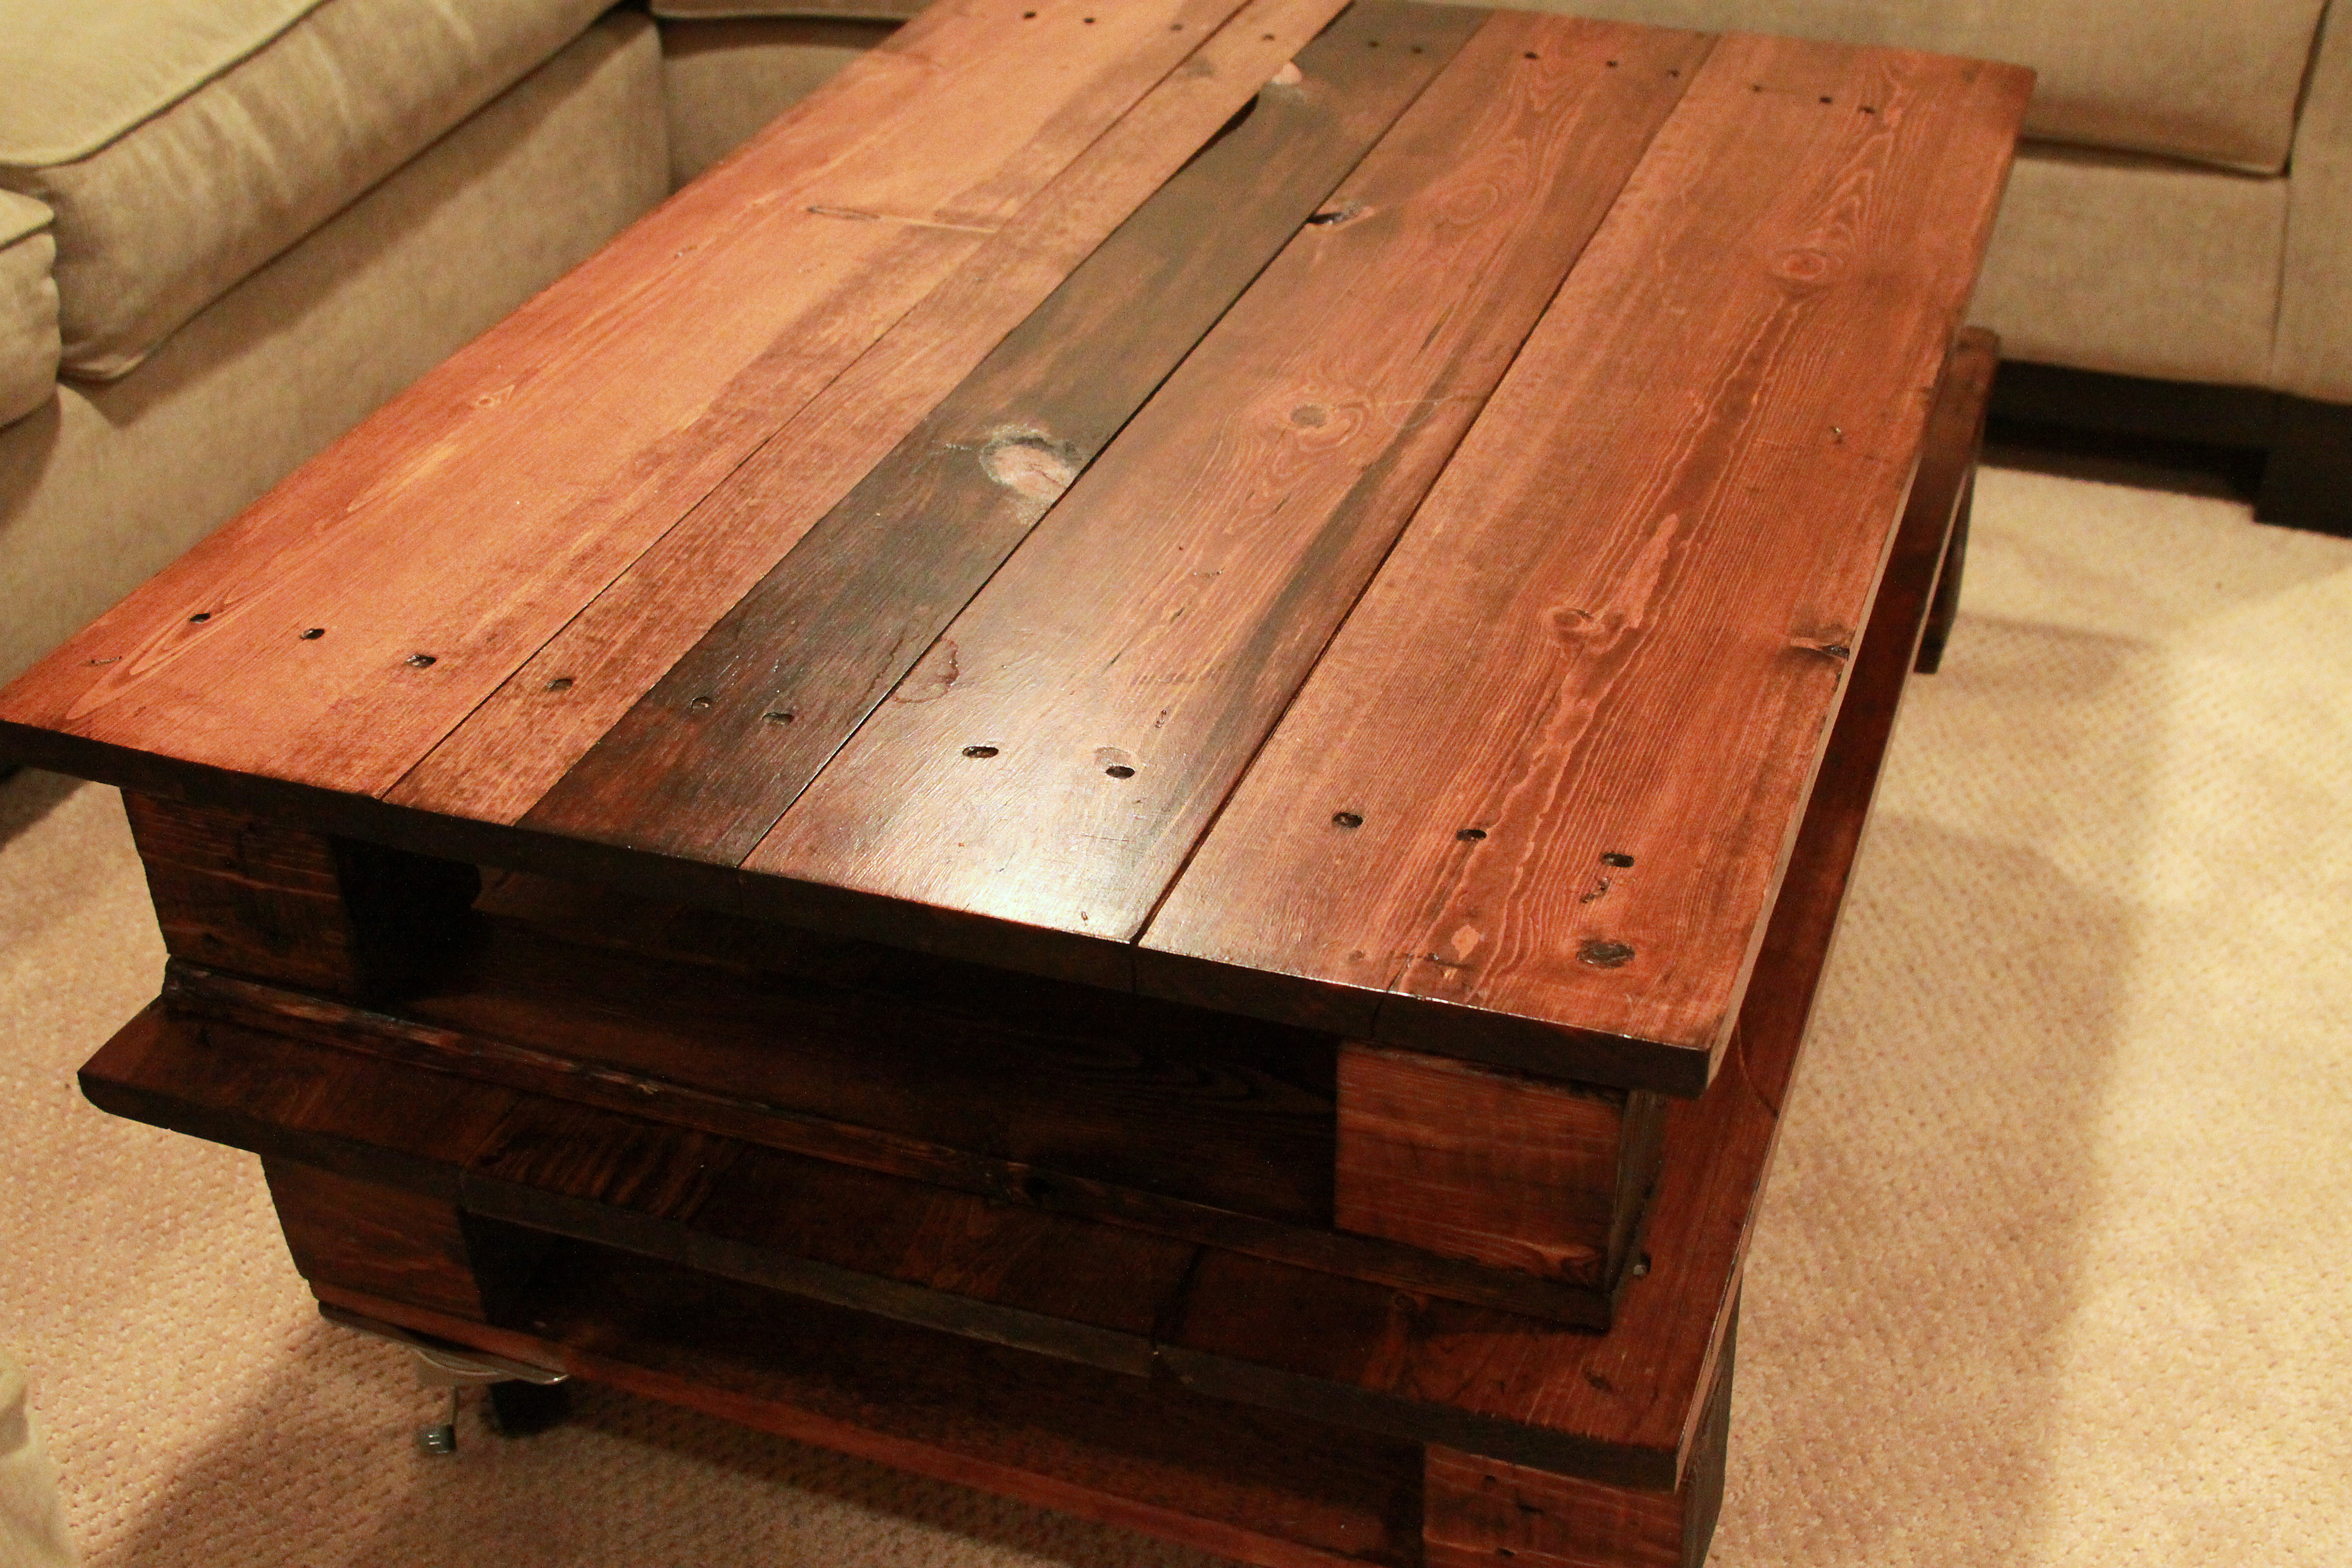 Pallet Coffee Table Ideas